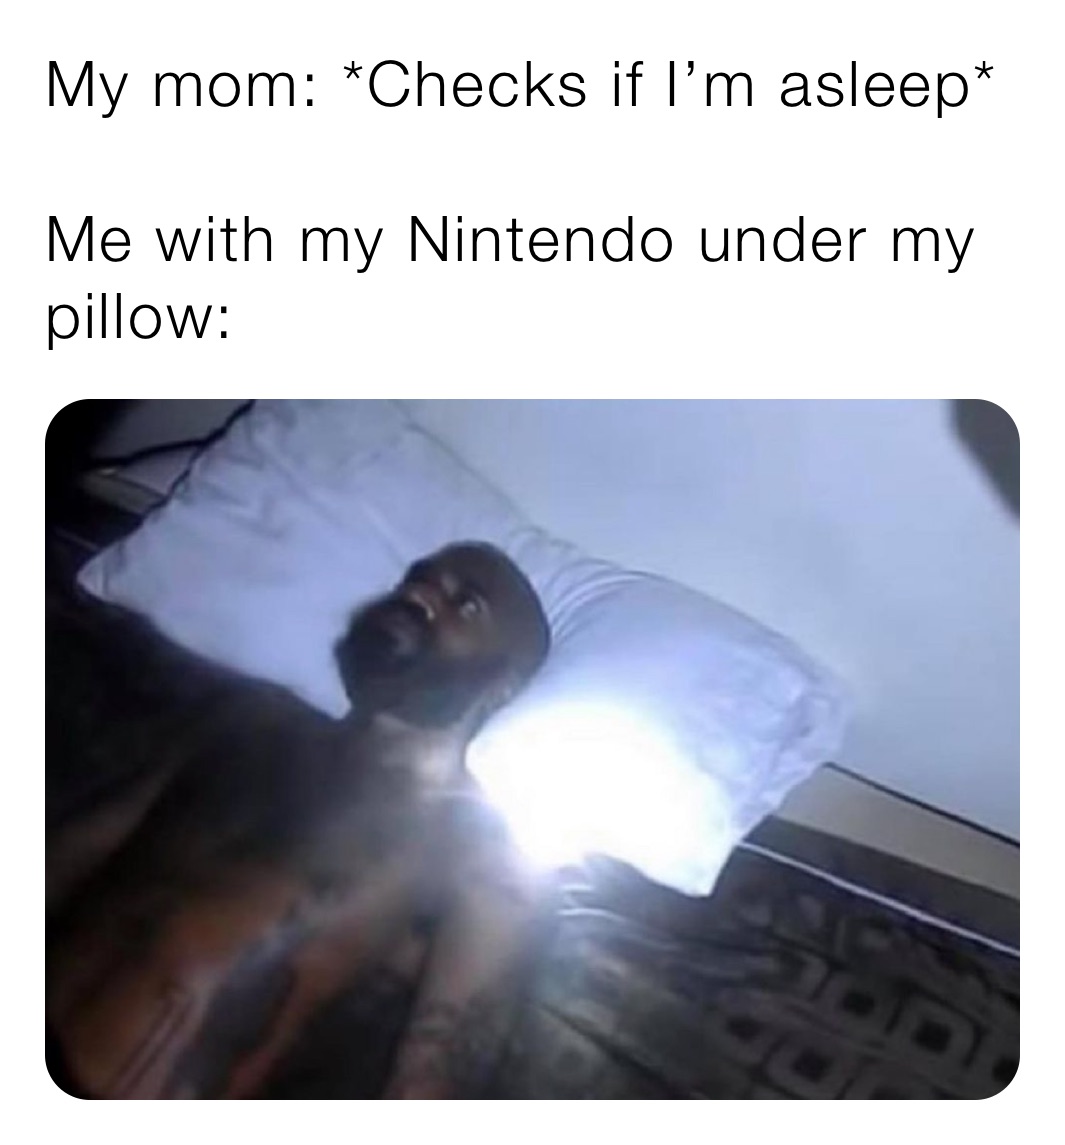 My mom: *Checks if I’m asleep*

Me with my Nintendo under my pillow: